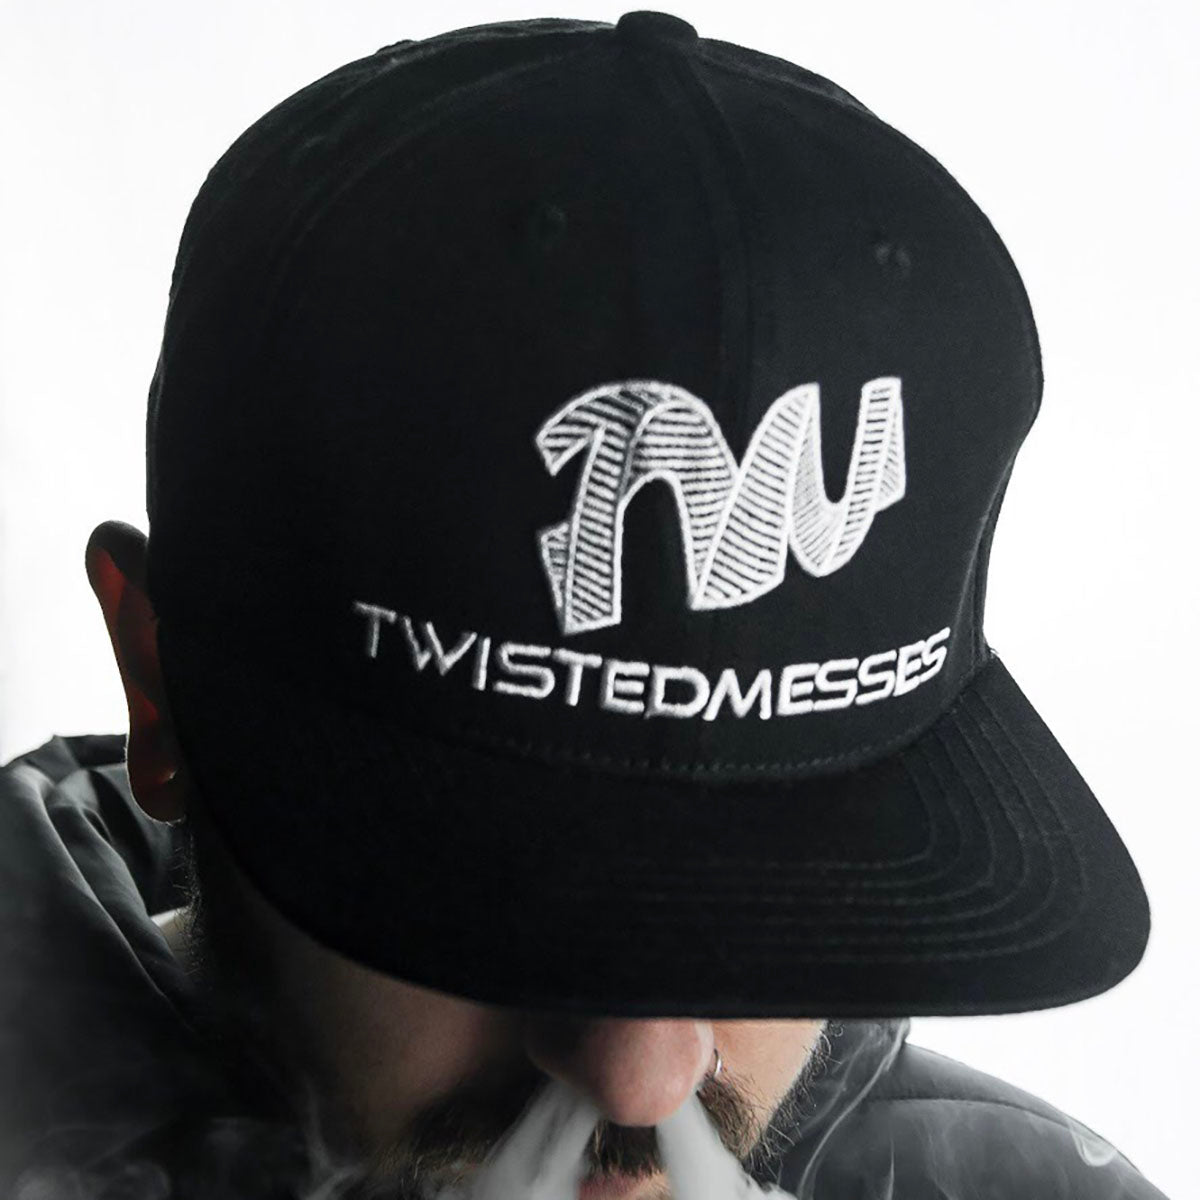 Snapback Black/White by Twisted Messes